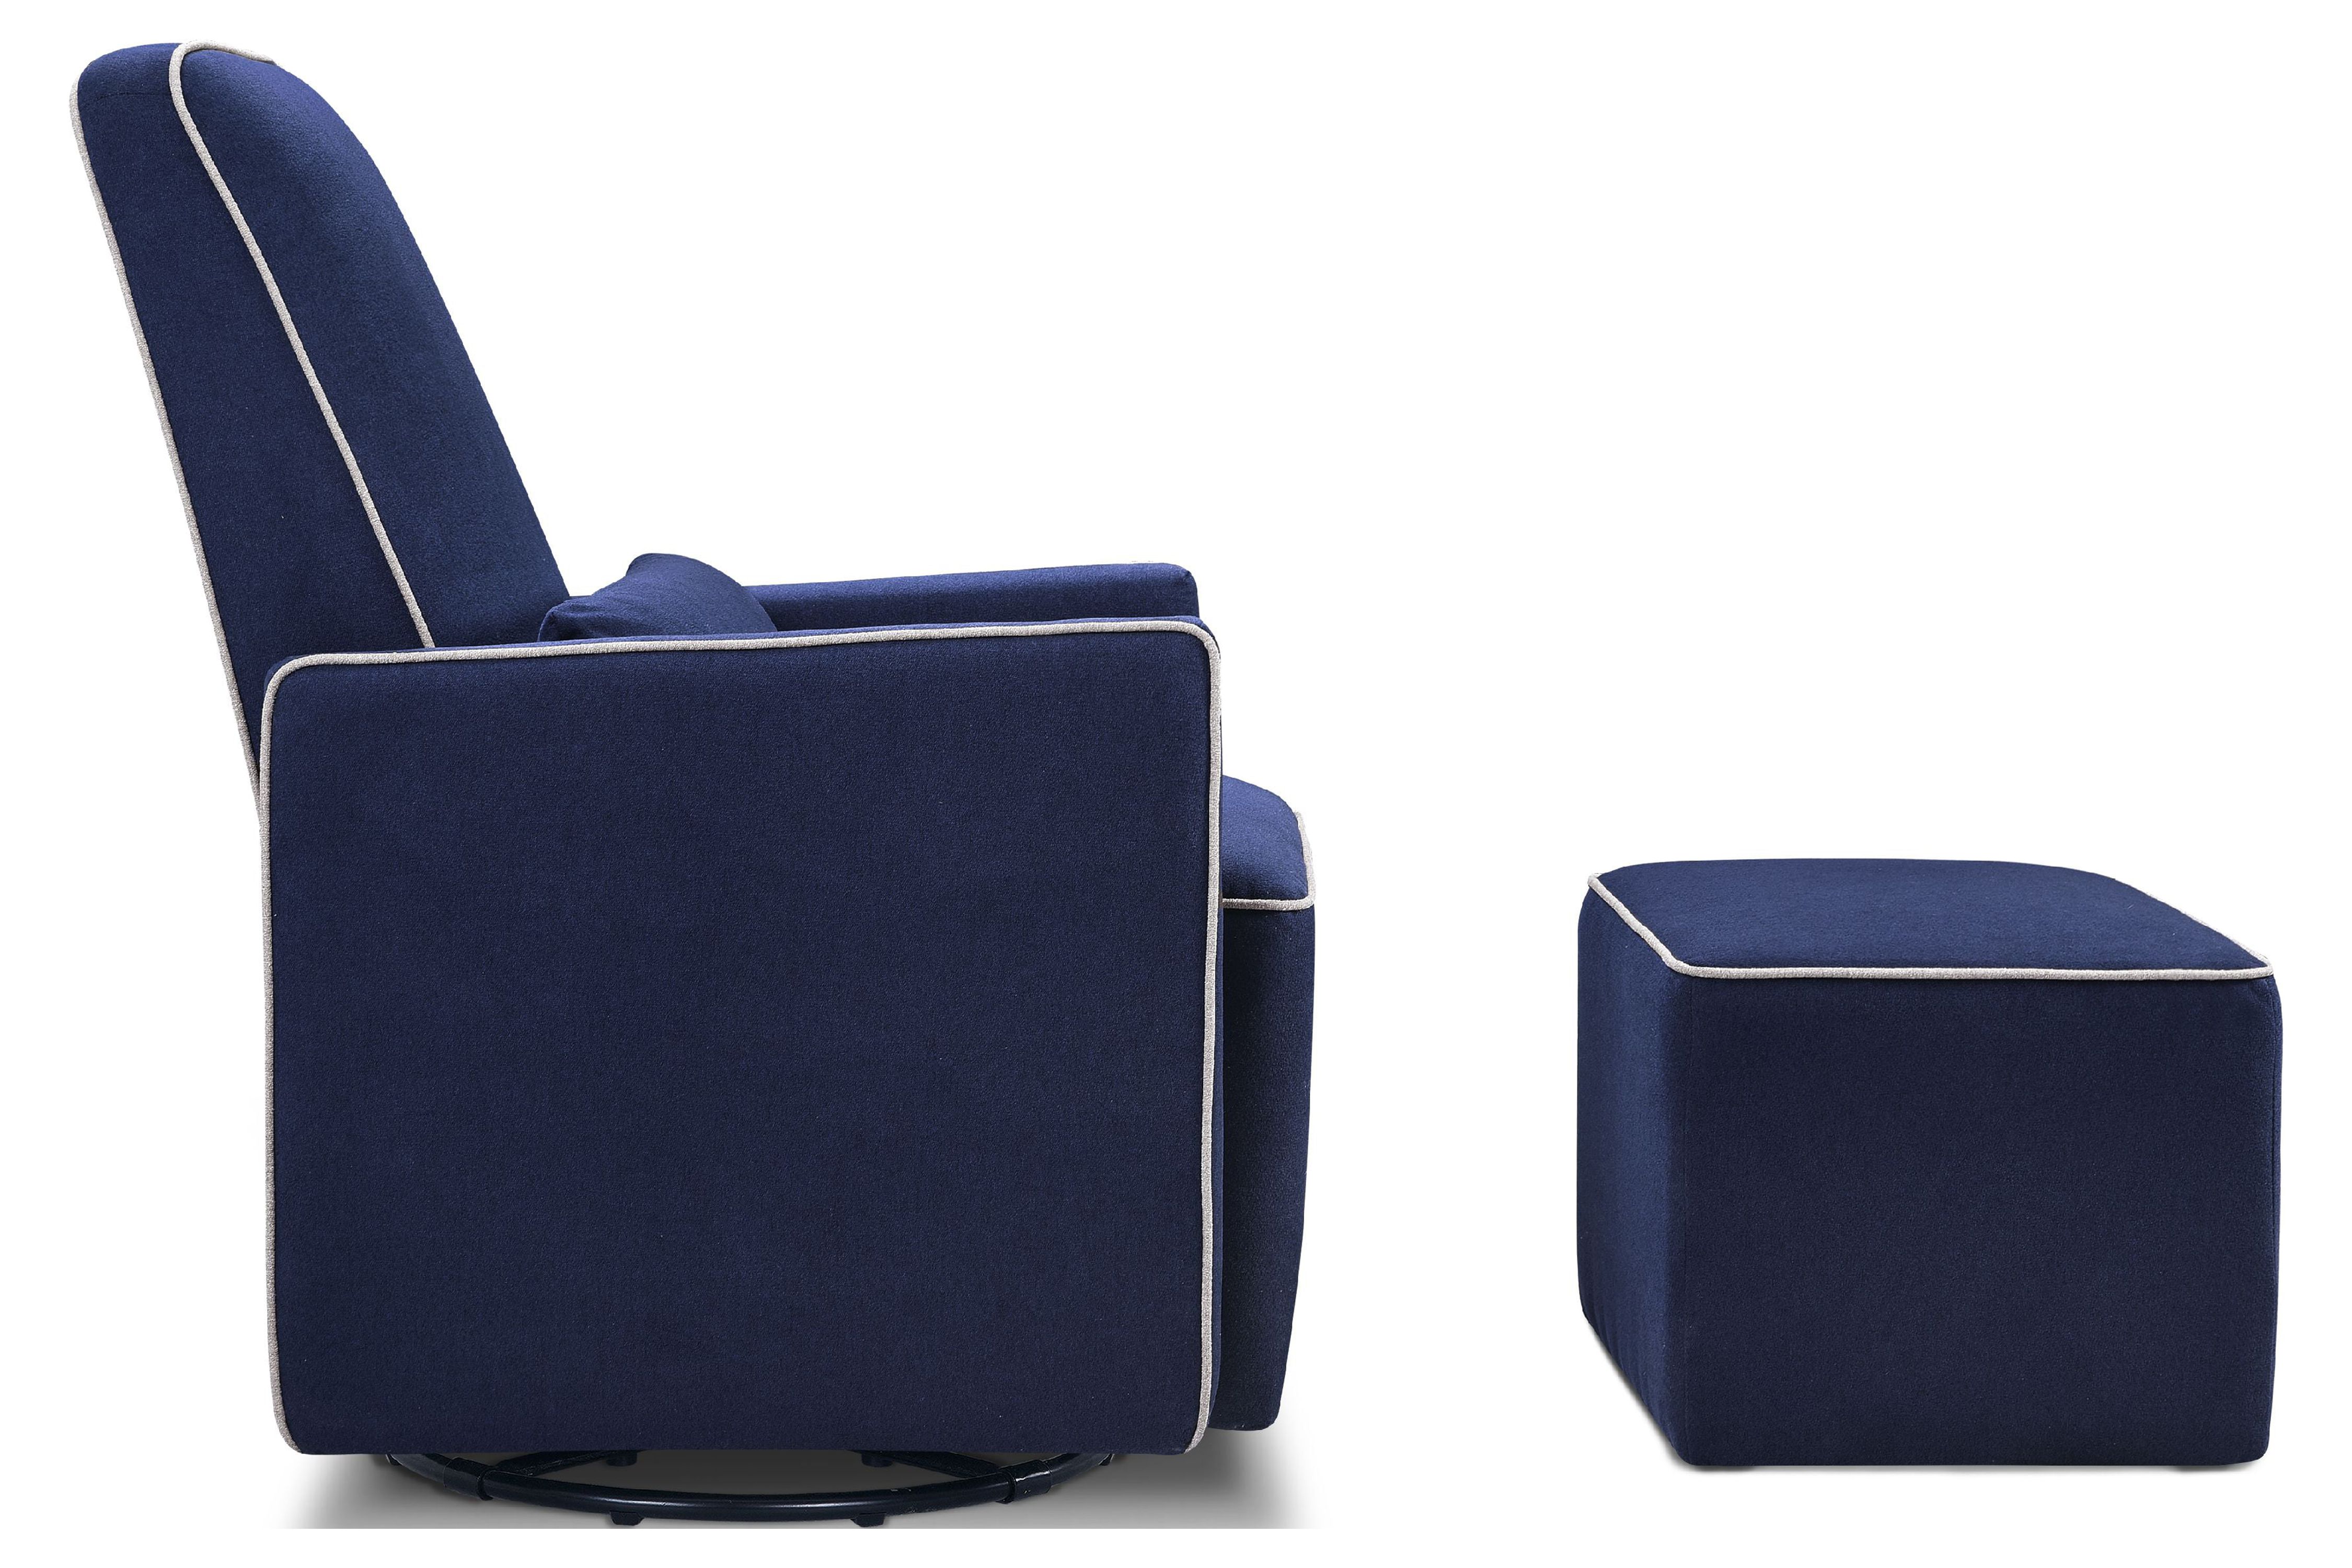 DaVinci Baby Olive Glider and Ottoman, Navy and Grey - image 4 of 10